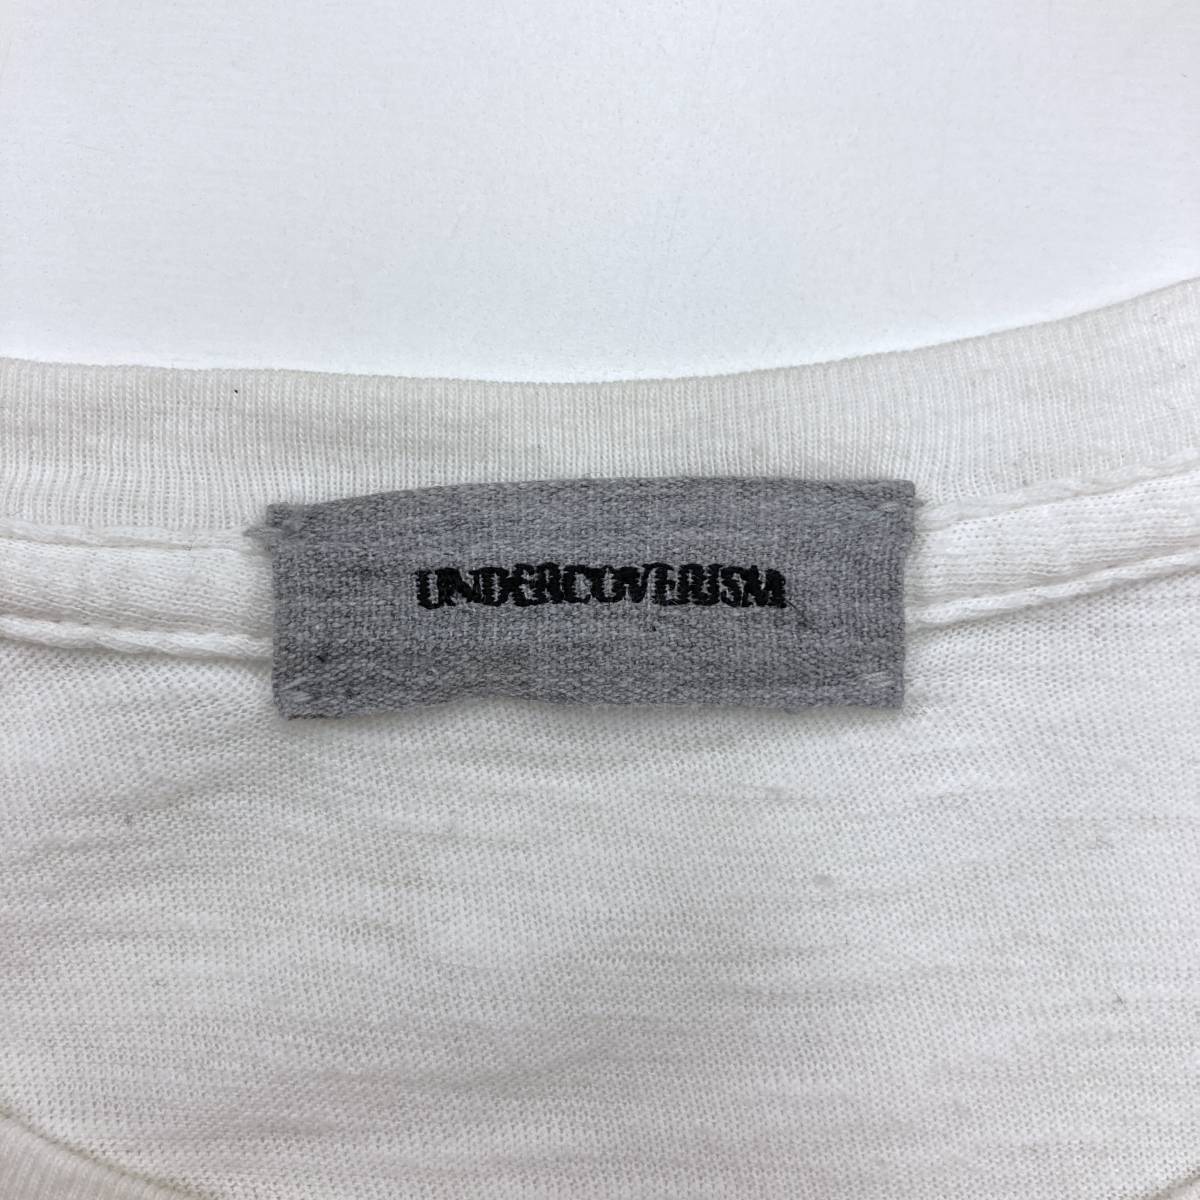 12SS UNDERCOVER OPENSTRINGS CULT FIGURE 半袖 Tシャツ ホワイト 白 2サイズ UNDER COVER アンダーカバー カットソー Tee archive 3040081_画像4